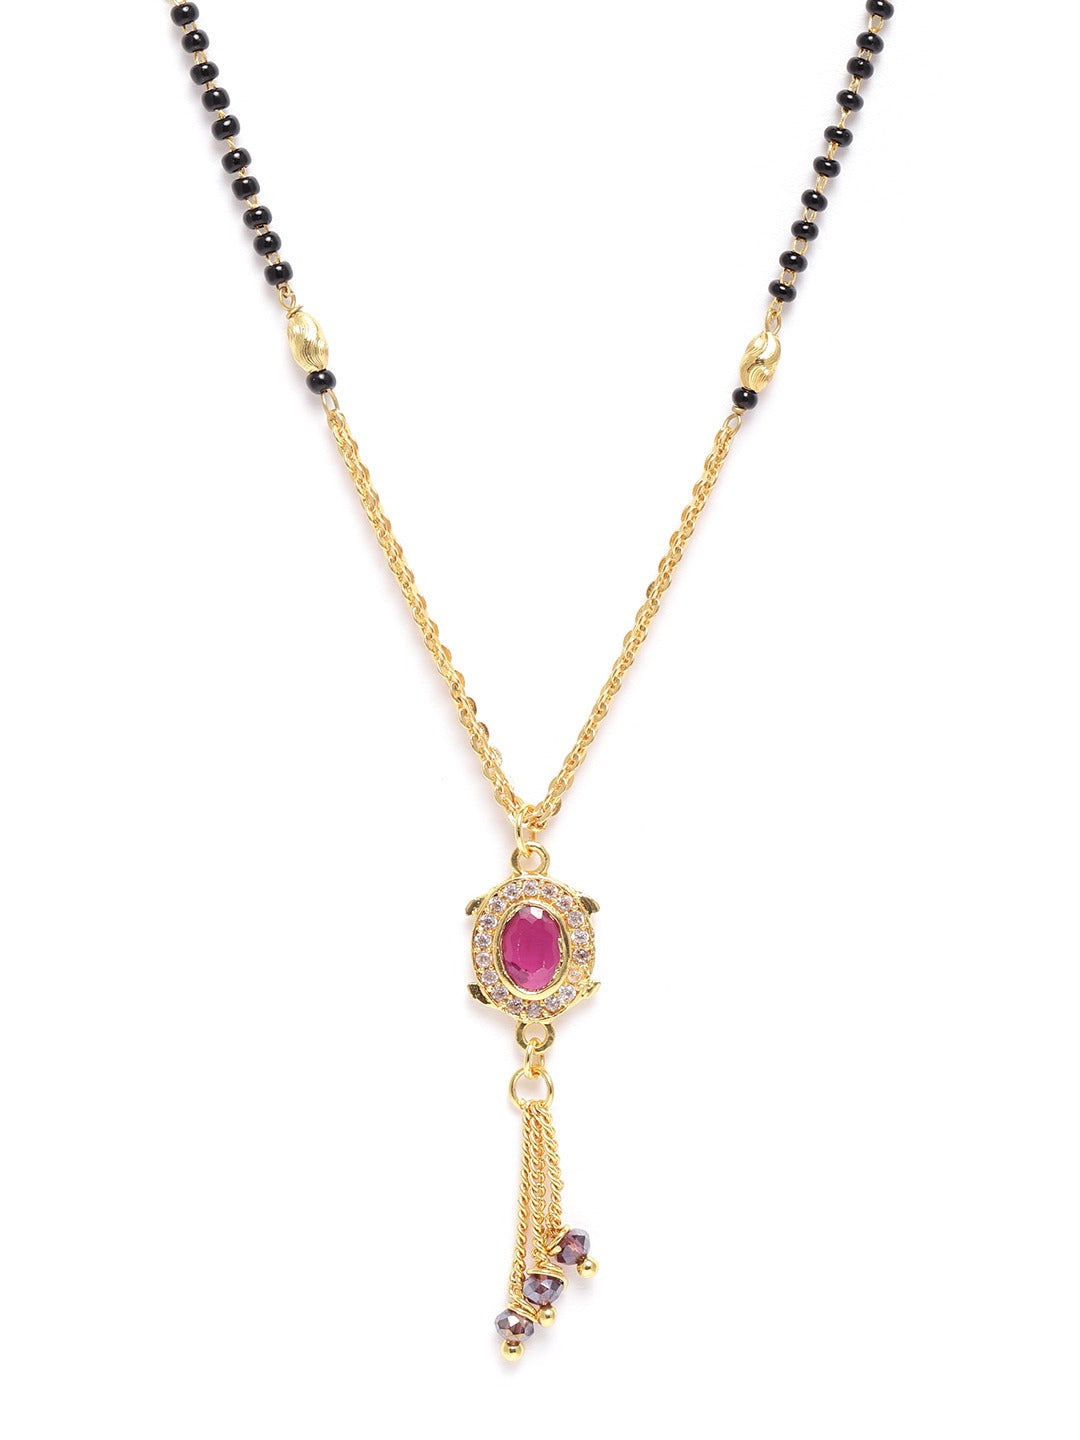 Black Gold-Plated AD Studded Beaded Mangalsutra